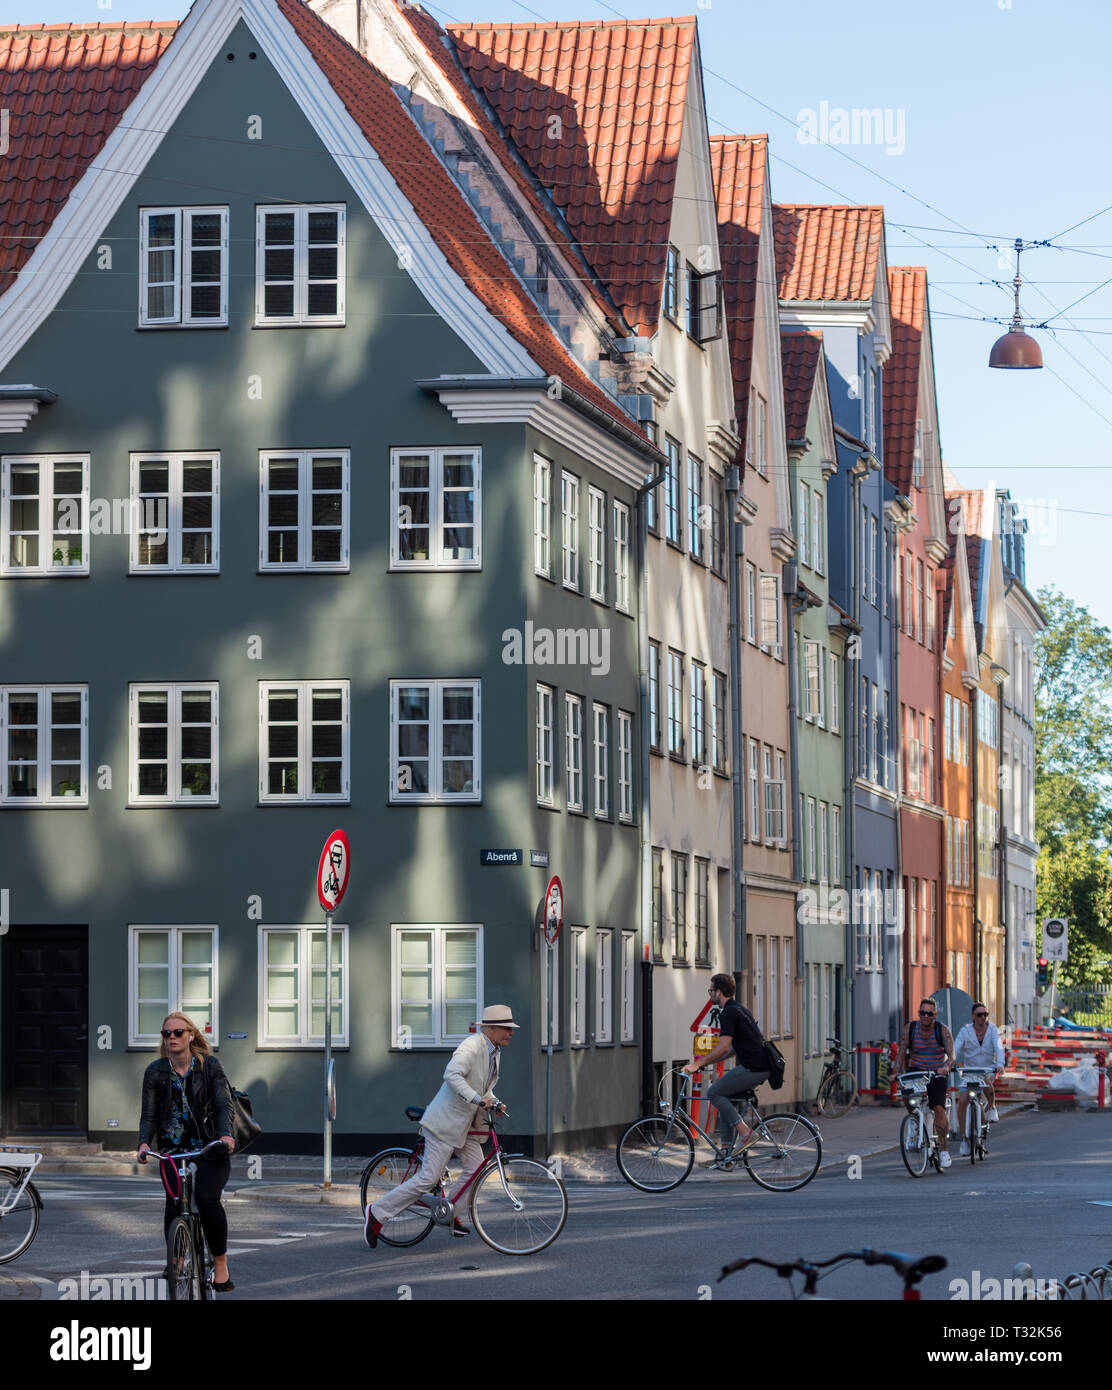 A dapper gentleman crossing Landemærket (landmark) on his bicycle. The colourful row of houses dates from the 1730's and No. 55 is listed. Stock Photo